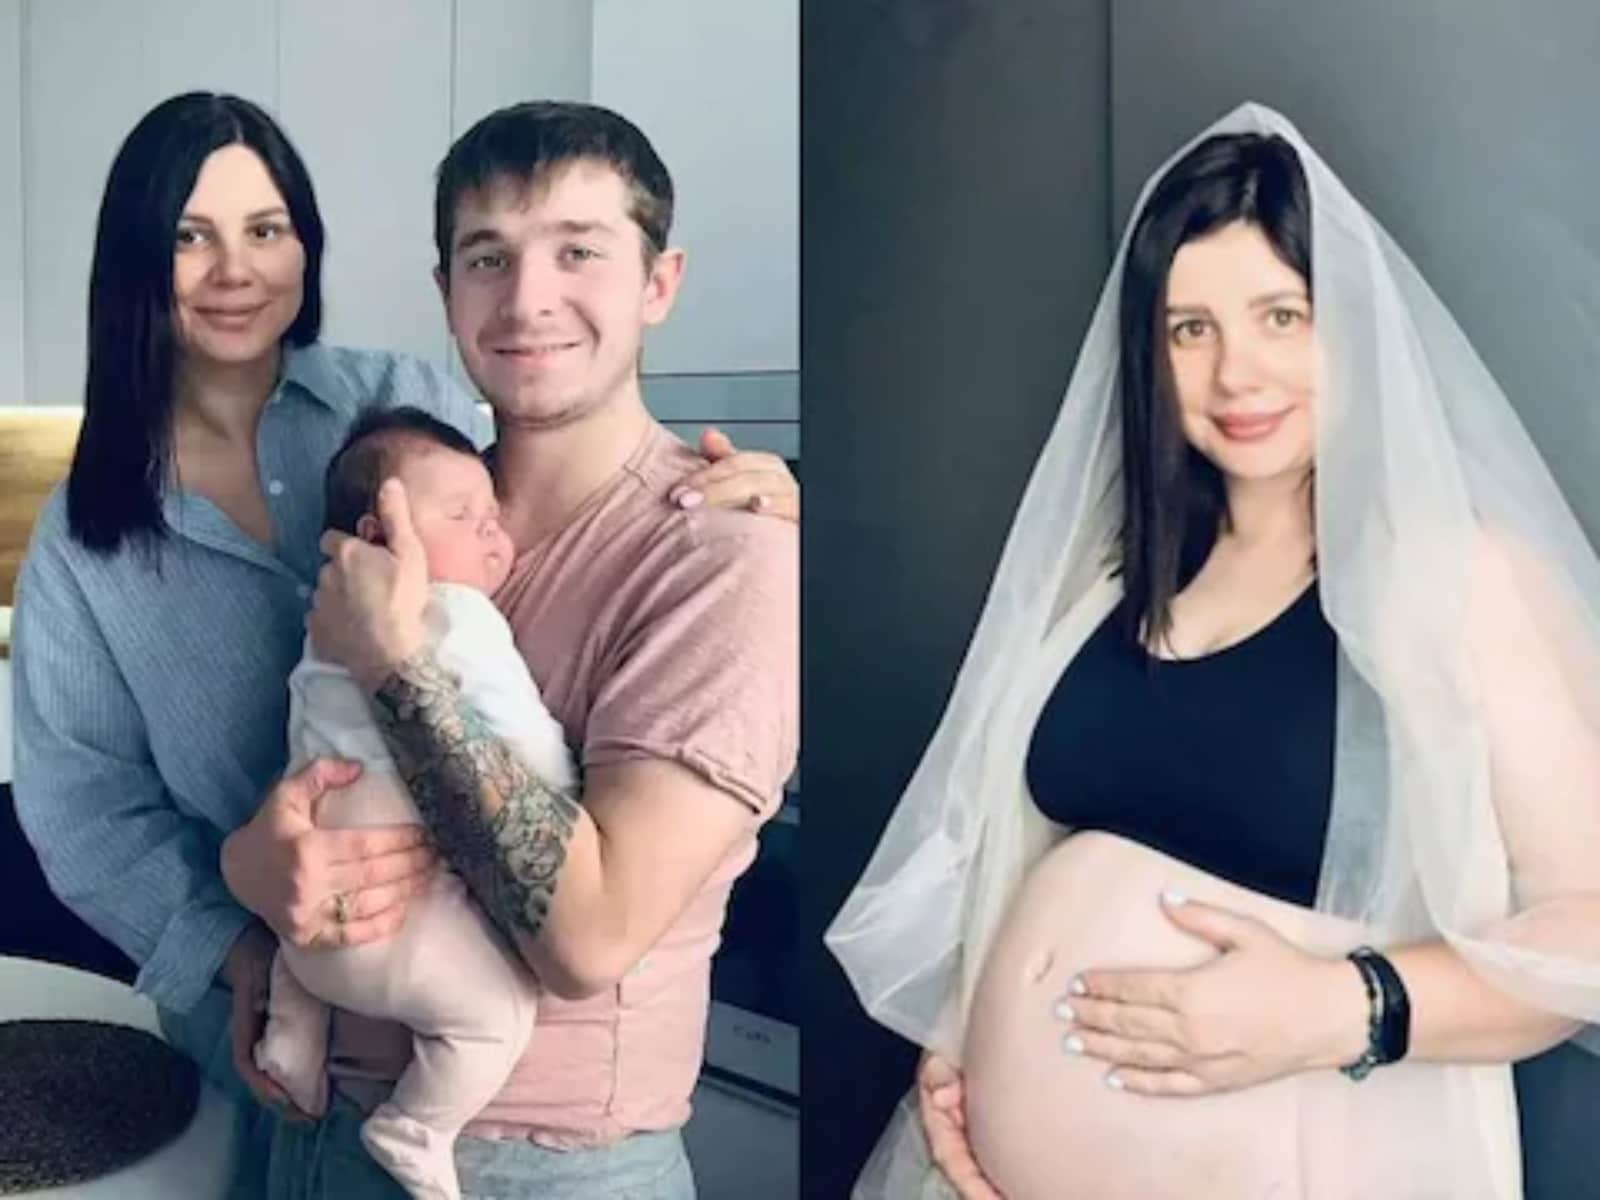 Russian Woman, Married To Stepson, Has A Baby; Expecting Another pic